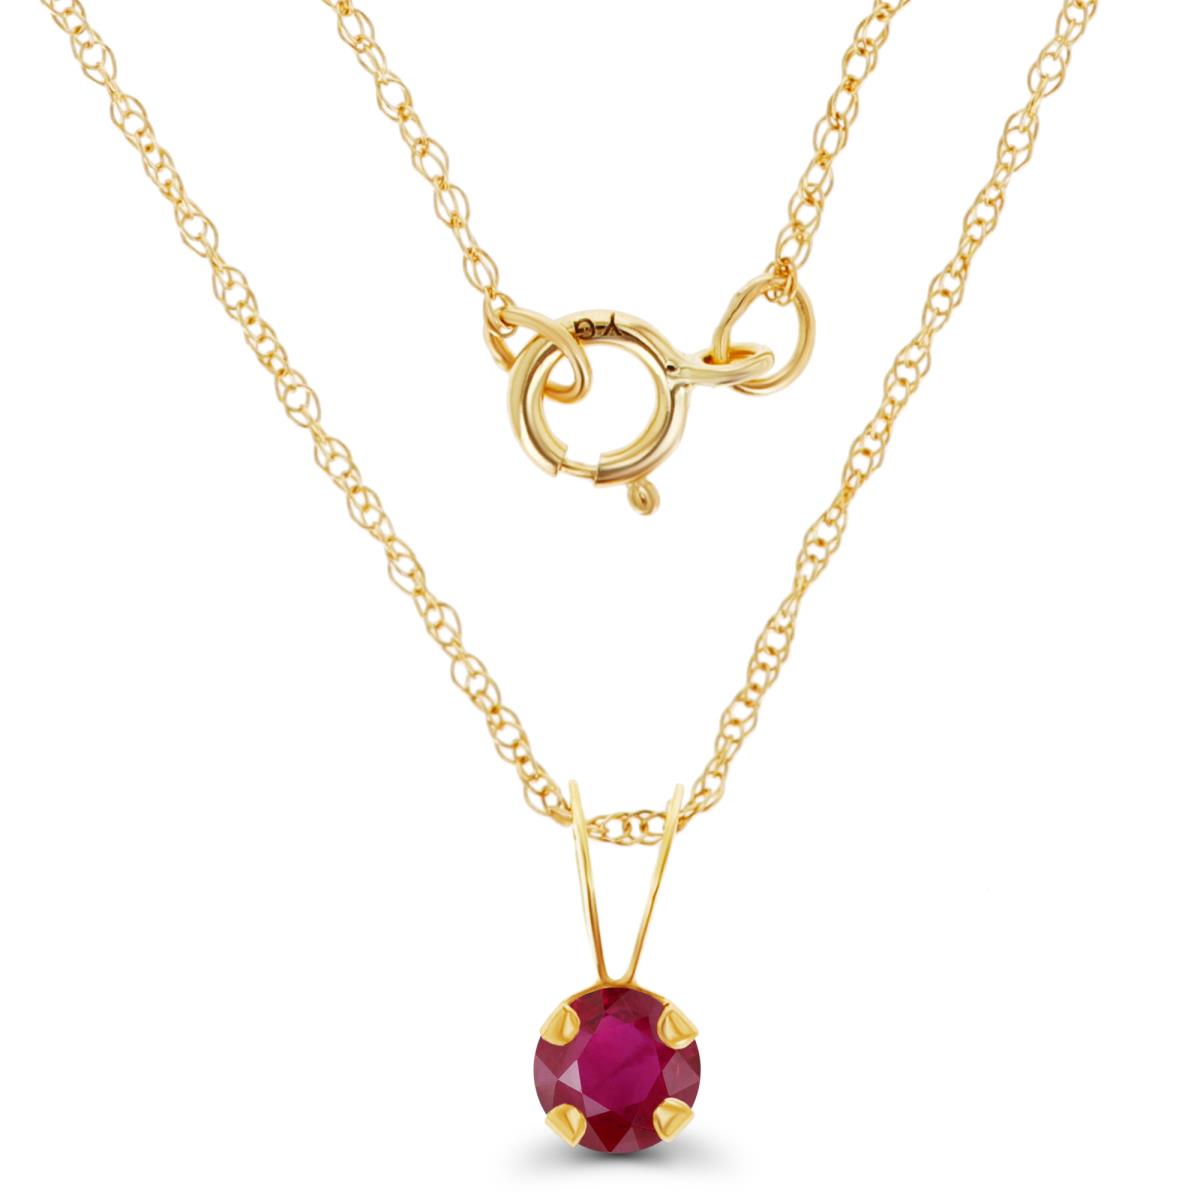 14K Yellow Gold 4mm Round Glass Filled Ruby 18" Rope Chain Necklace